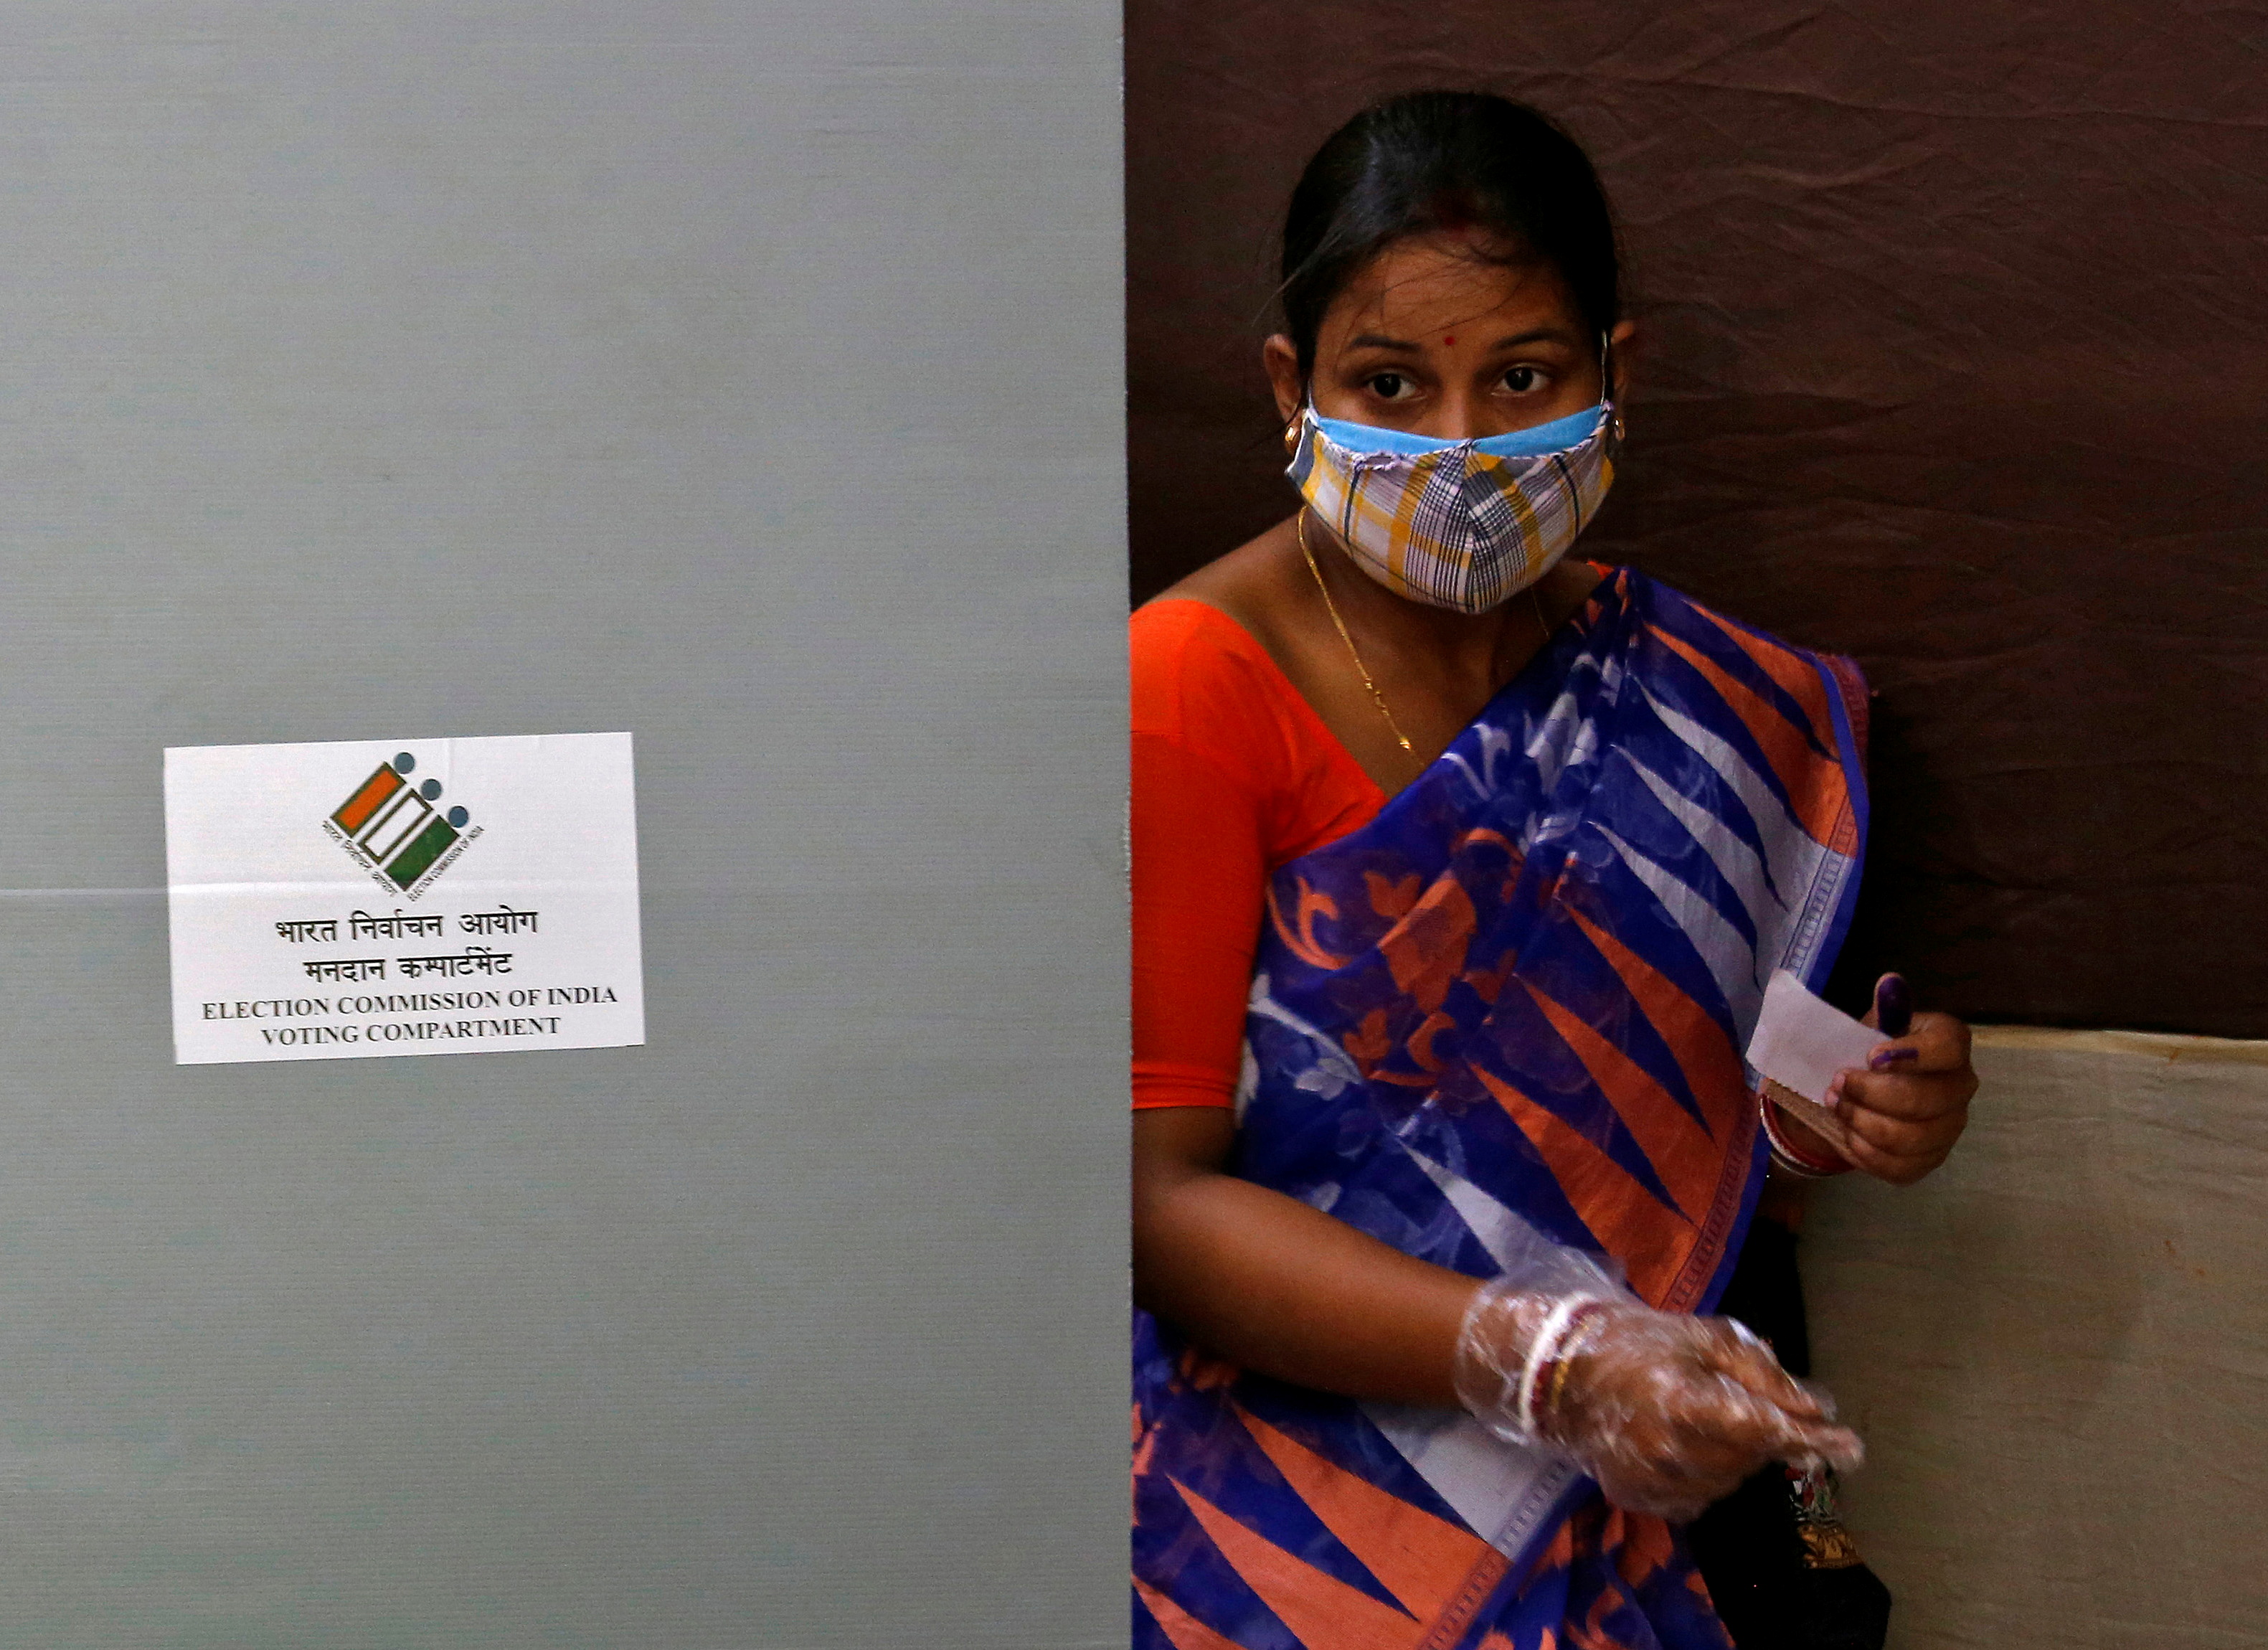 A woman wearing a protective face mask leaves after casting her vote at a polling station in Kolkata